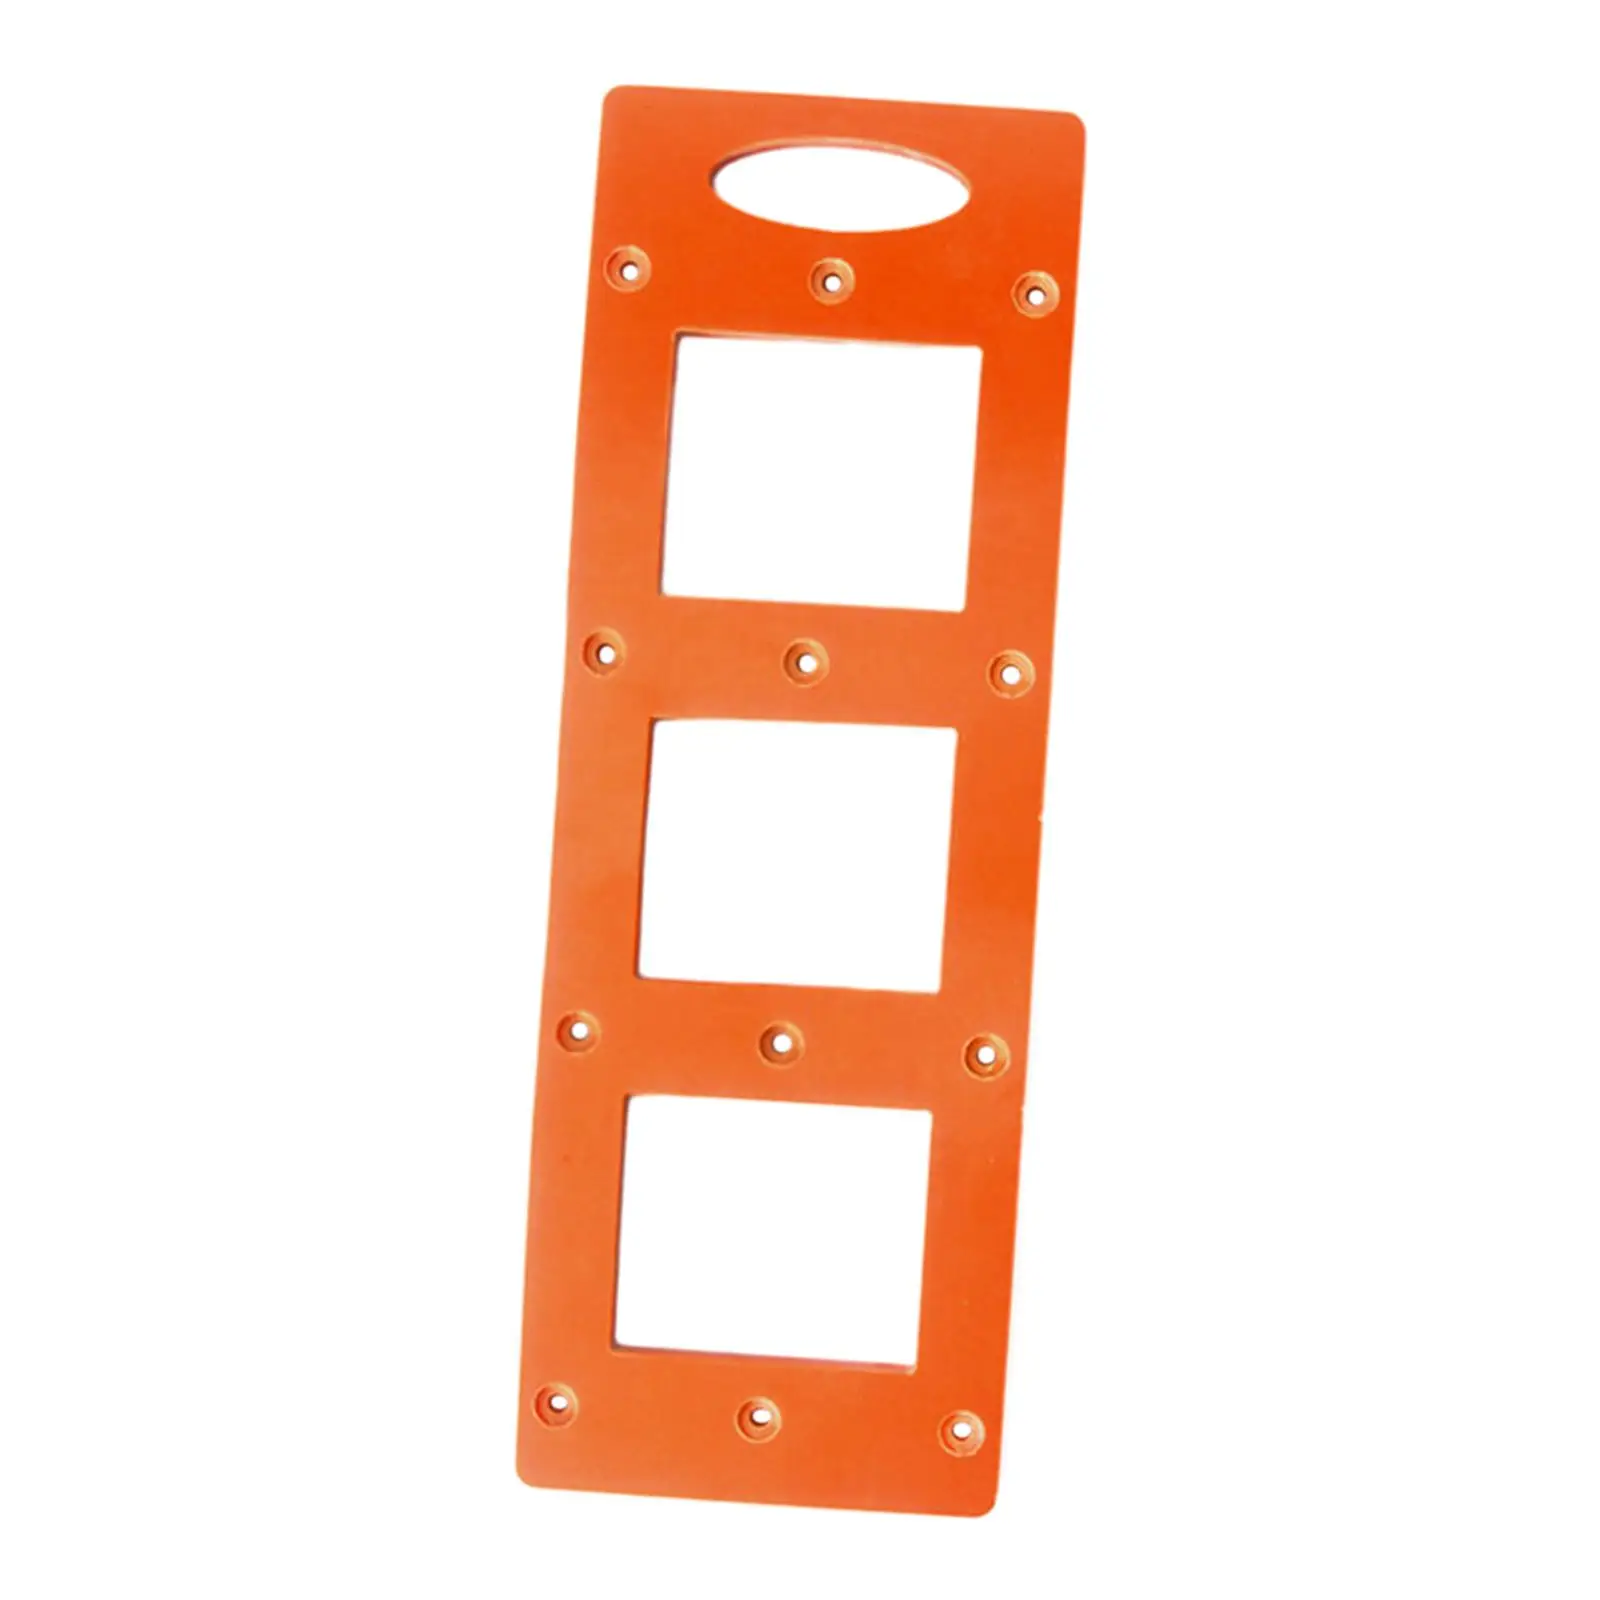 Socket Slotting Template Sturdy Socket Bottom Box Opening Drywall Portable with 12 Positioning Holes Mounting Bracket Template